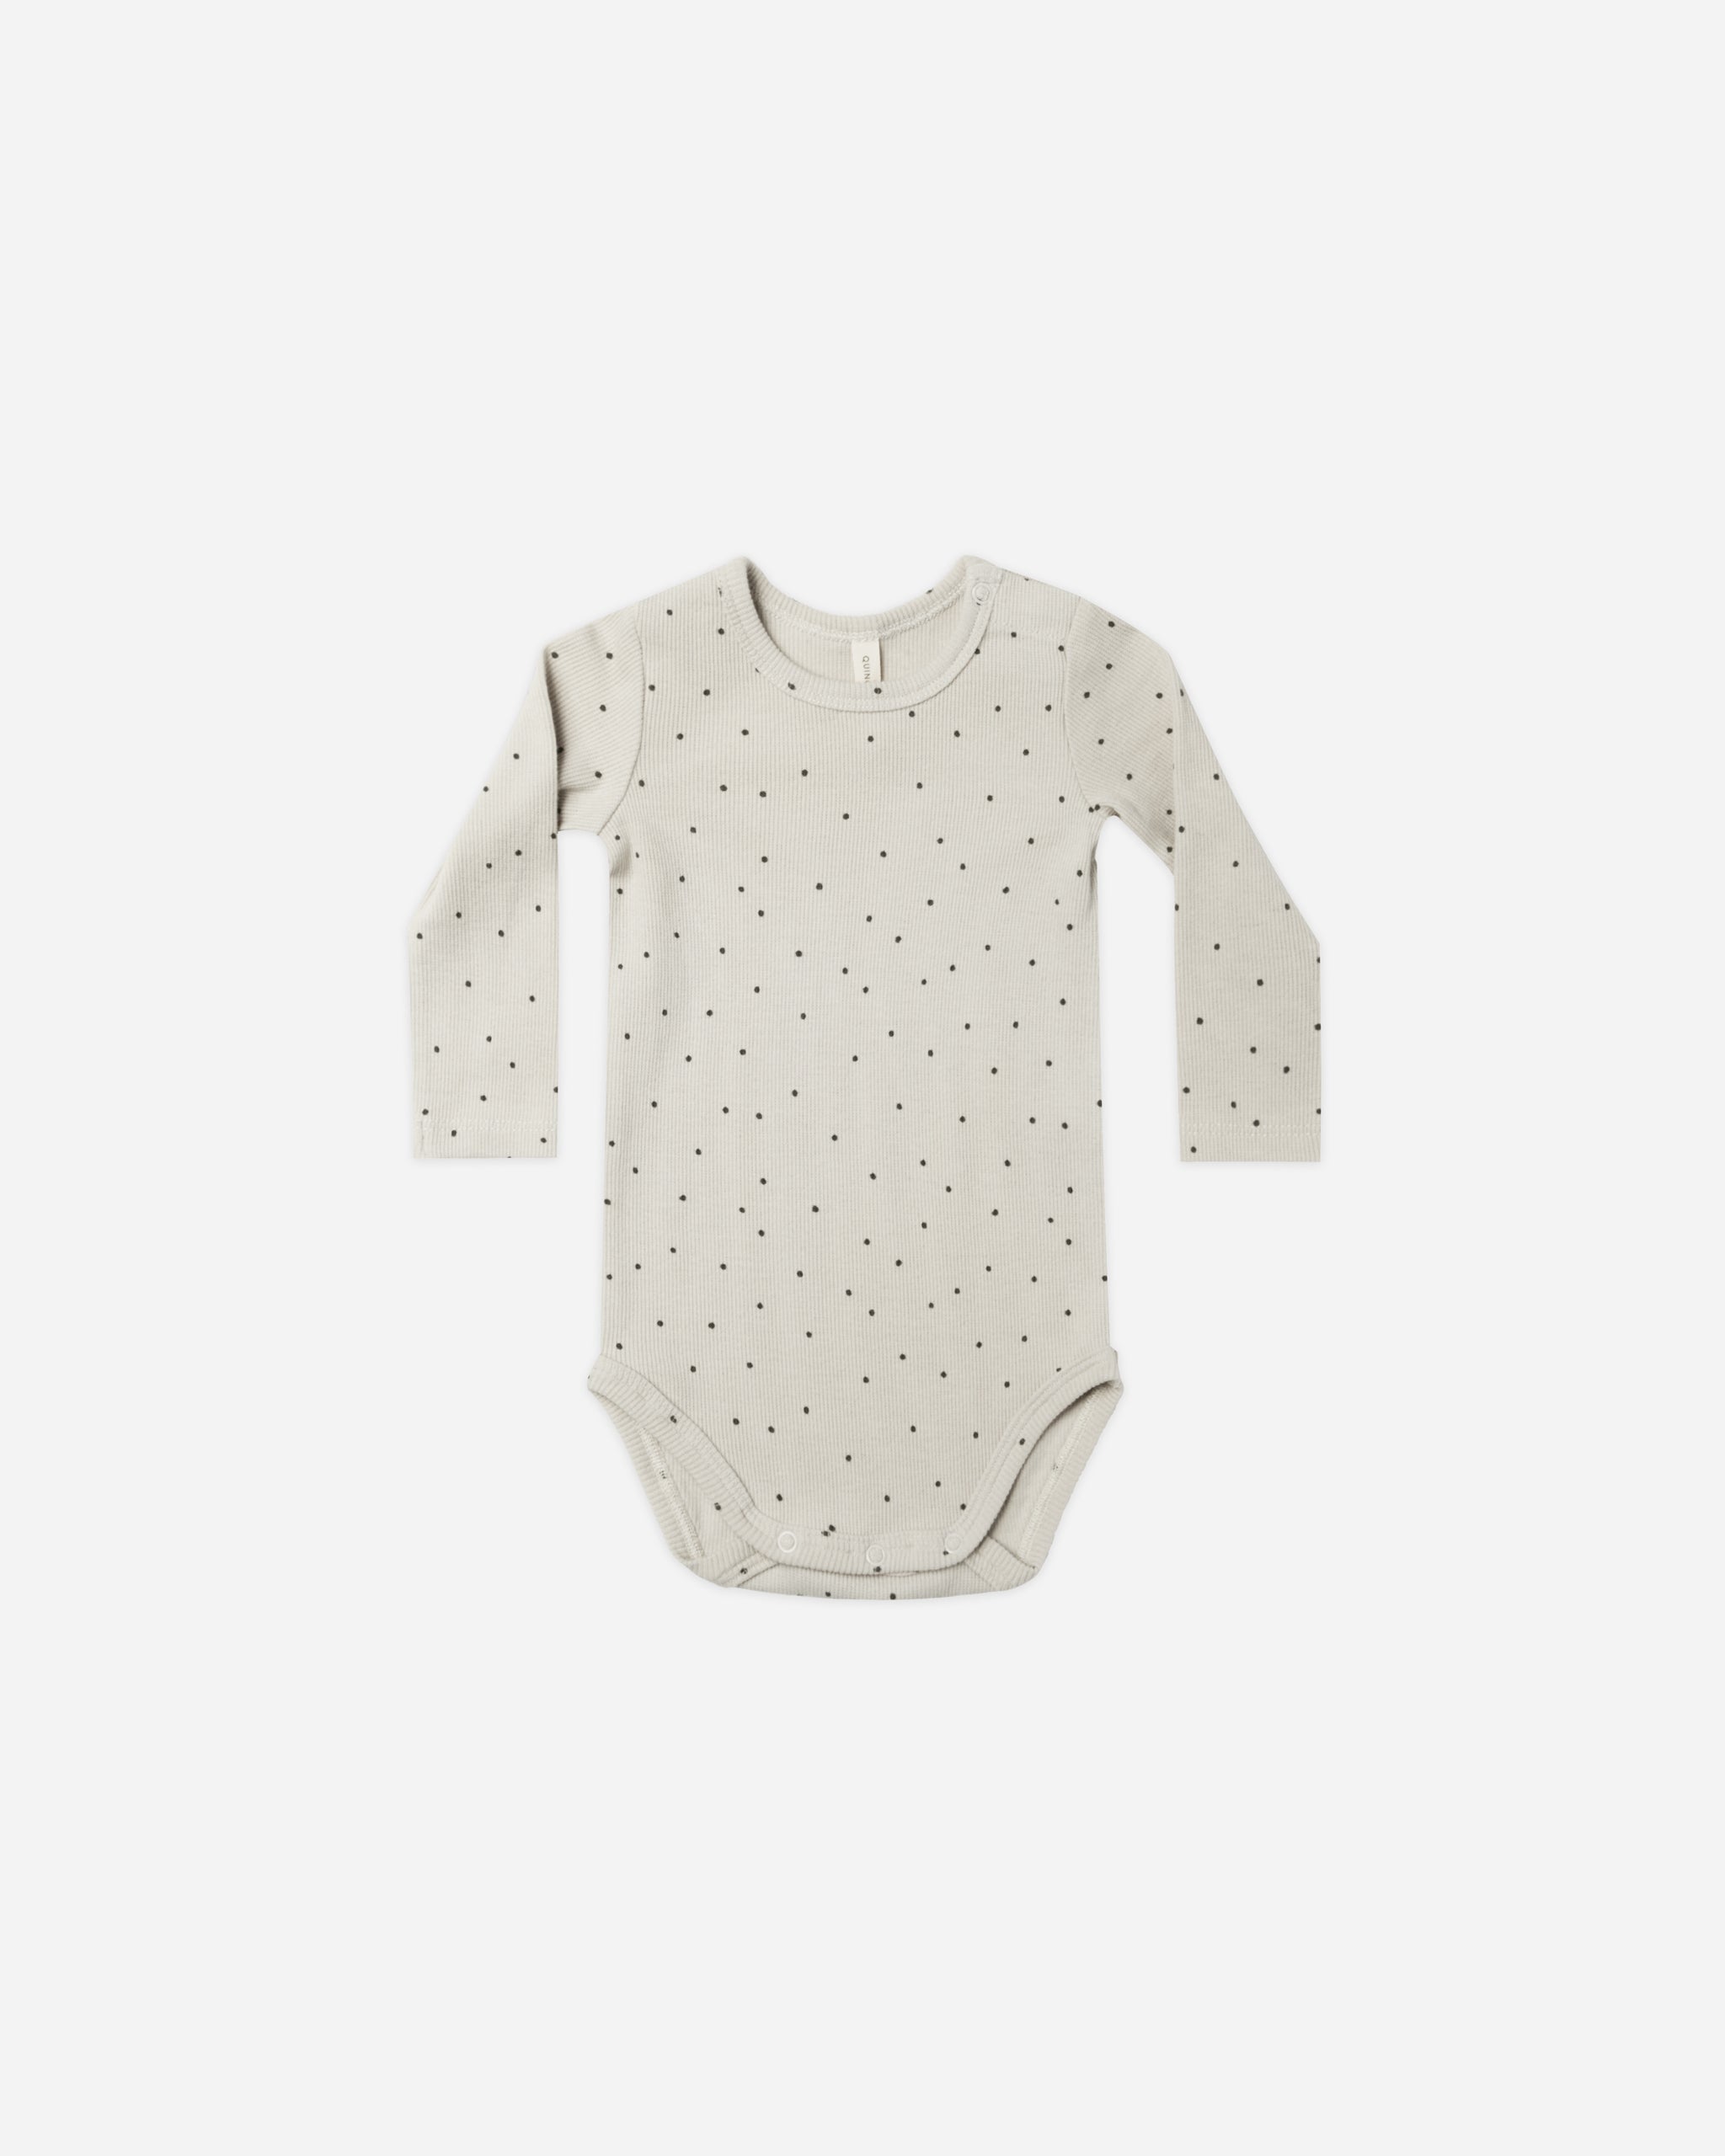 Ribbed Long Sleeve Bodysuit || Mini Dots - Rylee + Cru | Kids Clothes | Trendy Baby Clothes | Modern Infant Outfits |